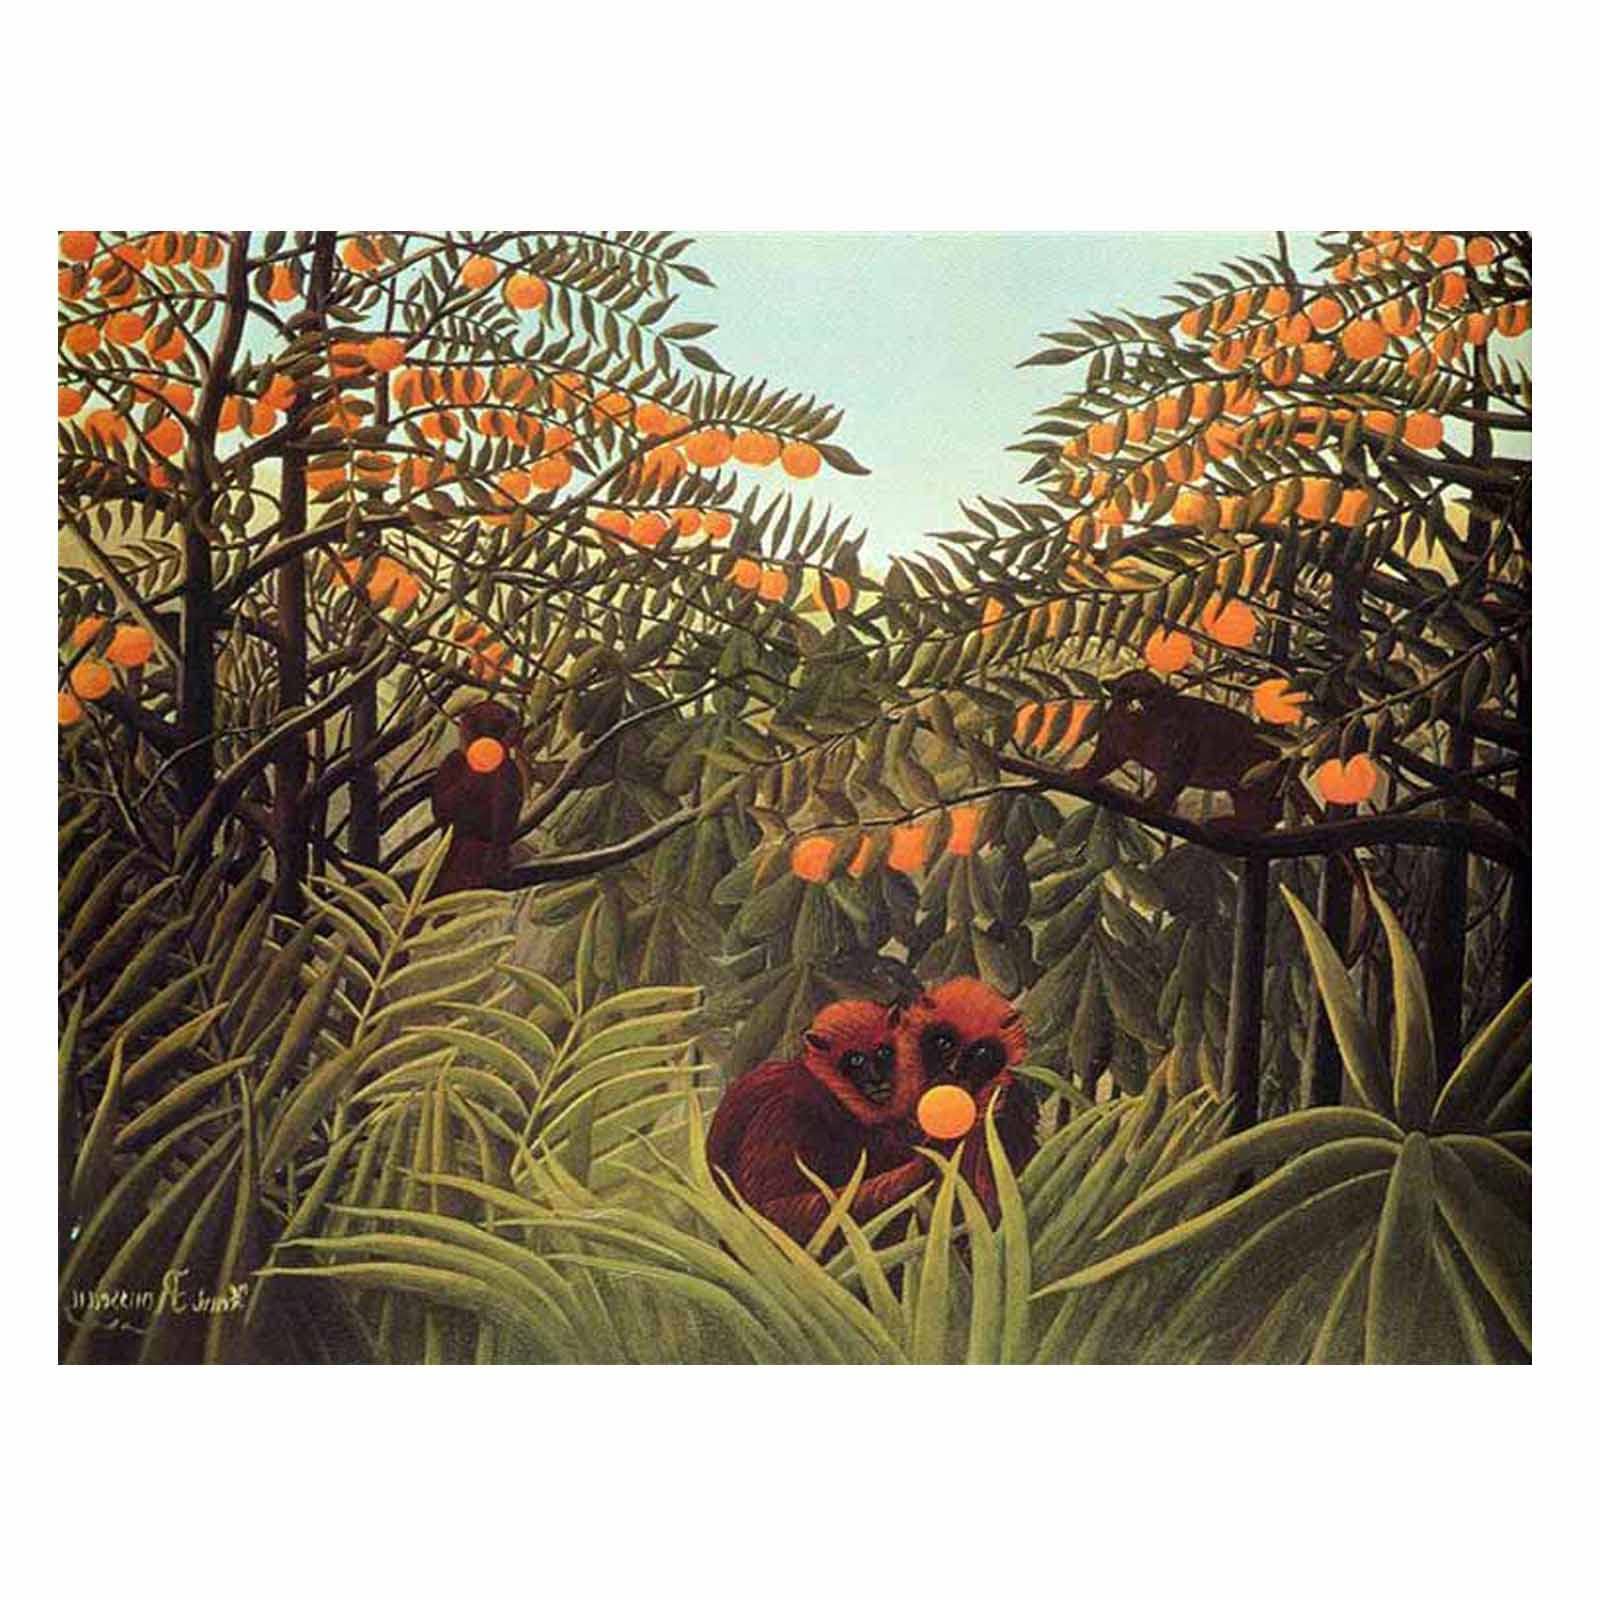 Best And Newest Amazon: Henri Rousseau Print Apes In The Orange Grove Wall Decor Living  Room Canvas Wall Art For Lliving Room Large Size Paintings For Wall  Decorations Wall Art Bedroom Prints(20x26cm8x10in,unframe): Posters & Prints With Regard To Orange Grove Wall Art (View 7 of 15)